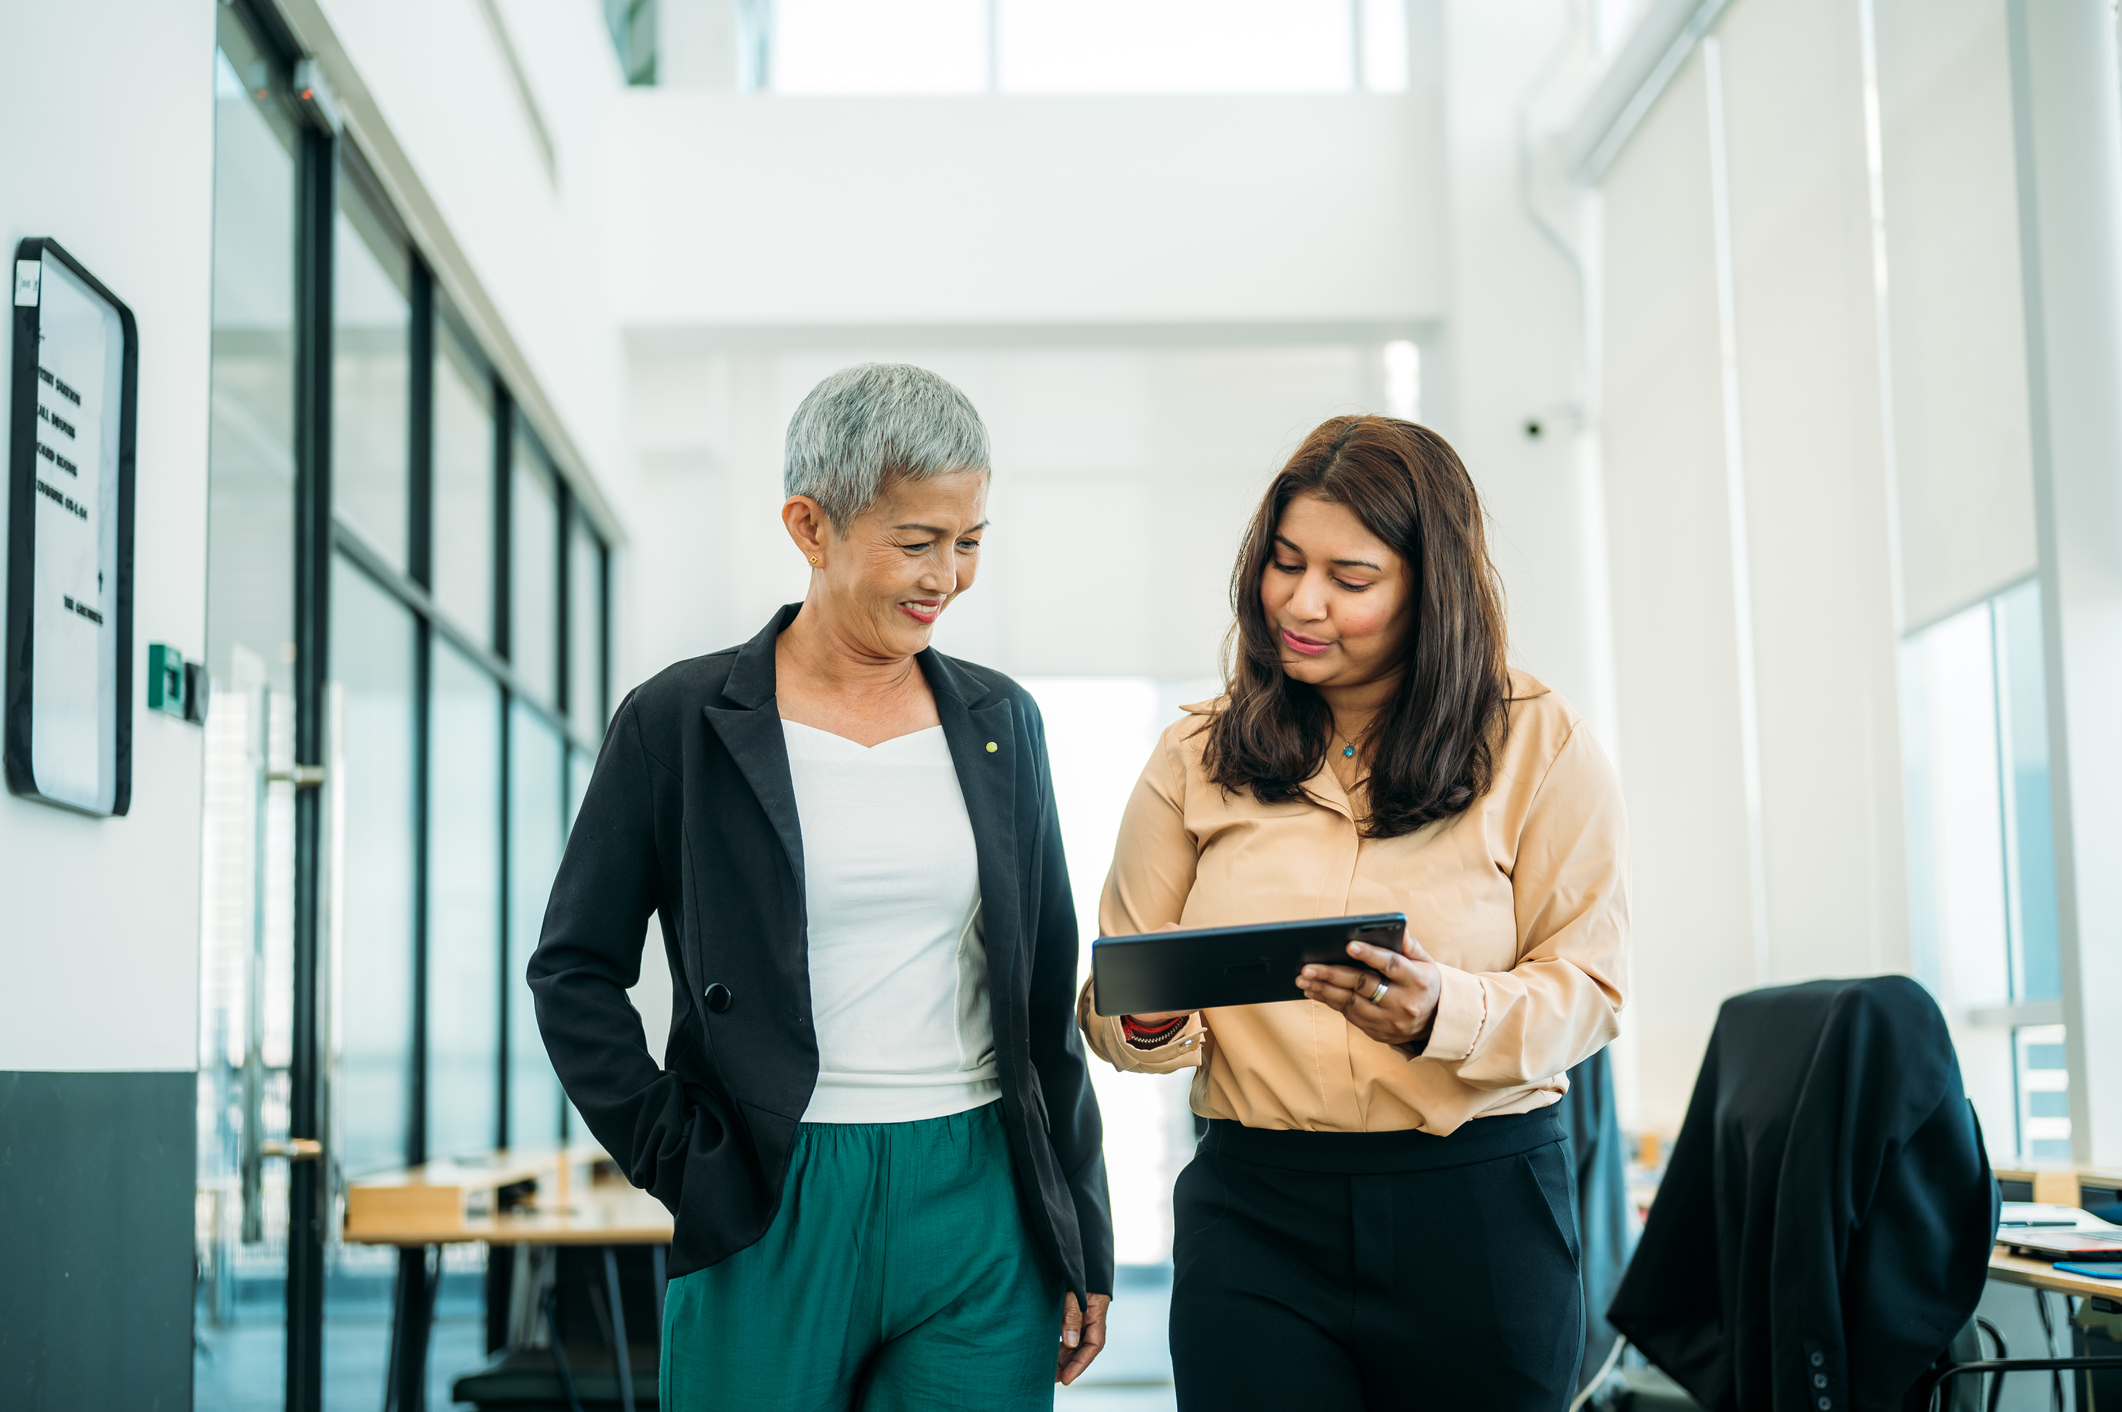 Stock Image of Two Women in An Office